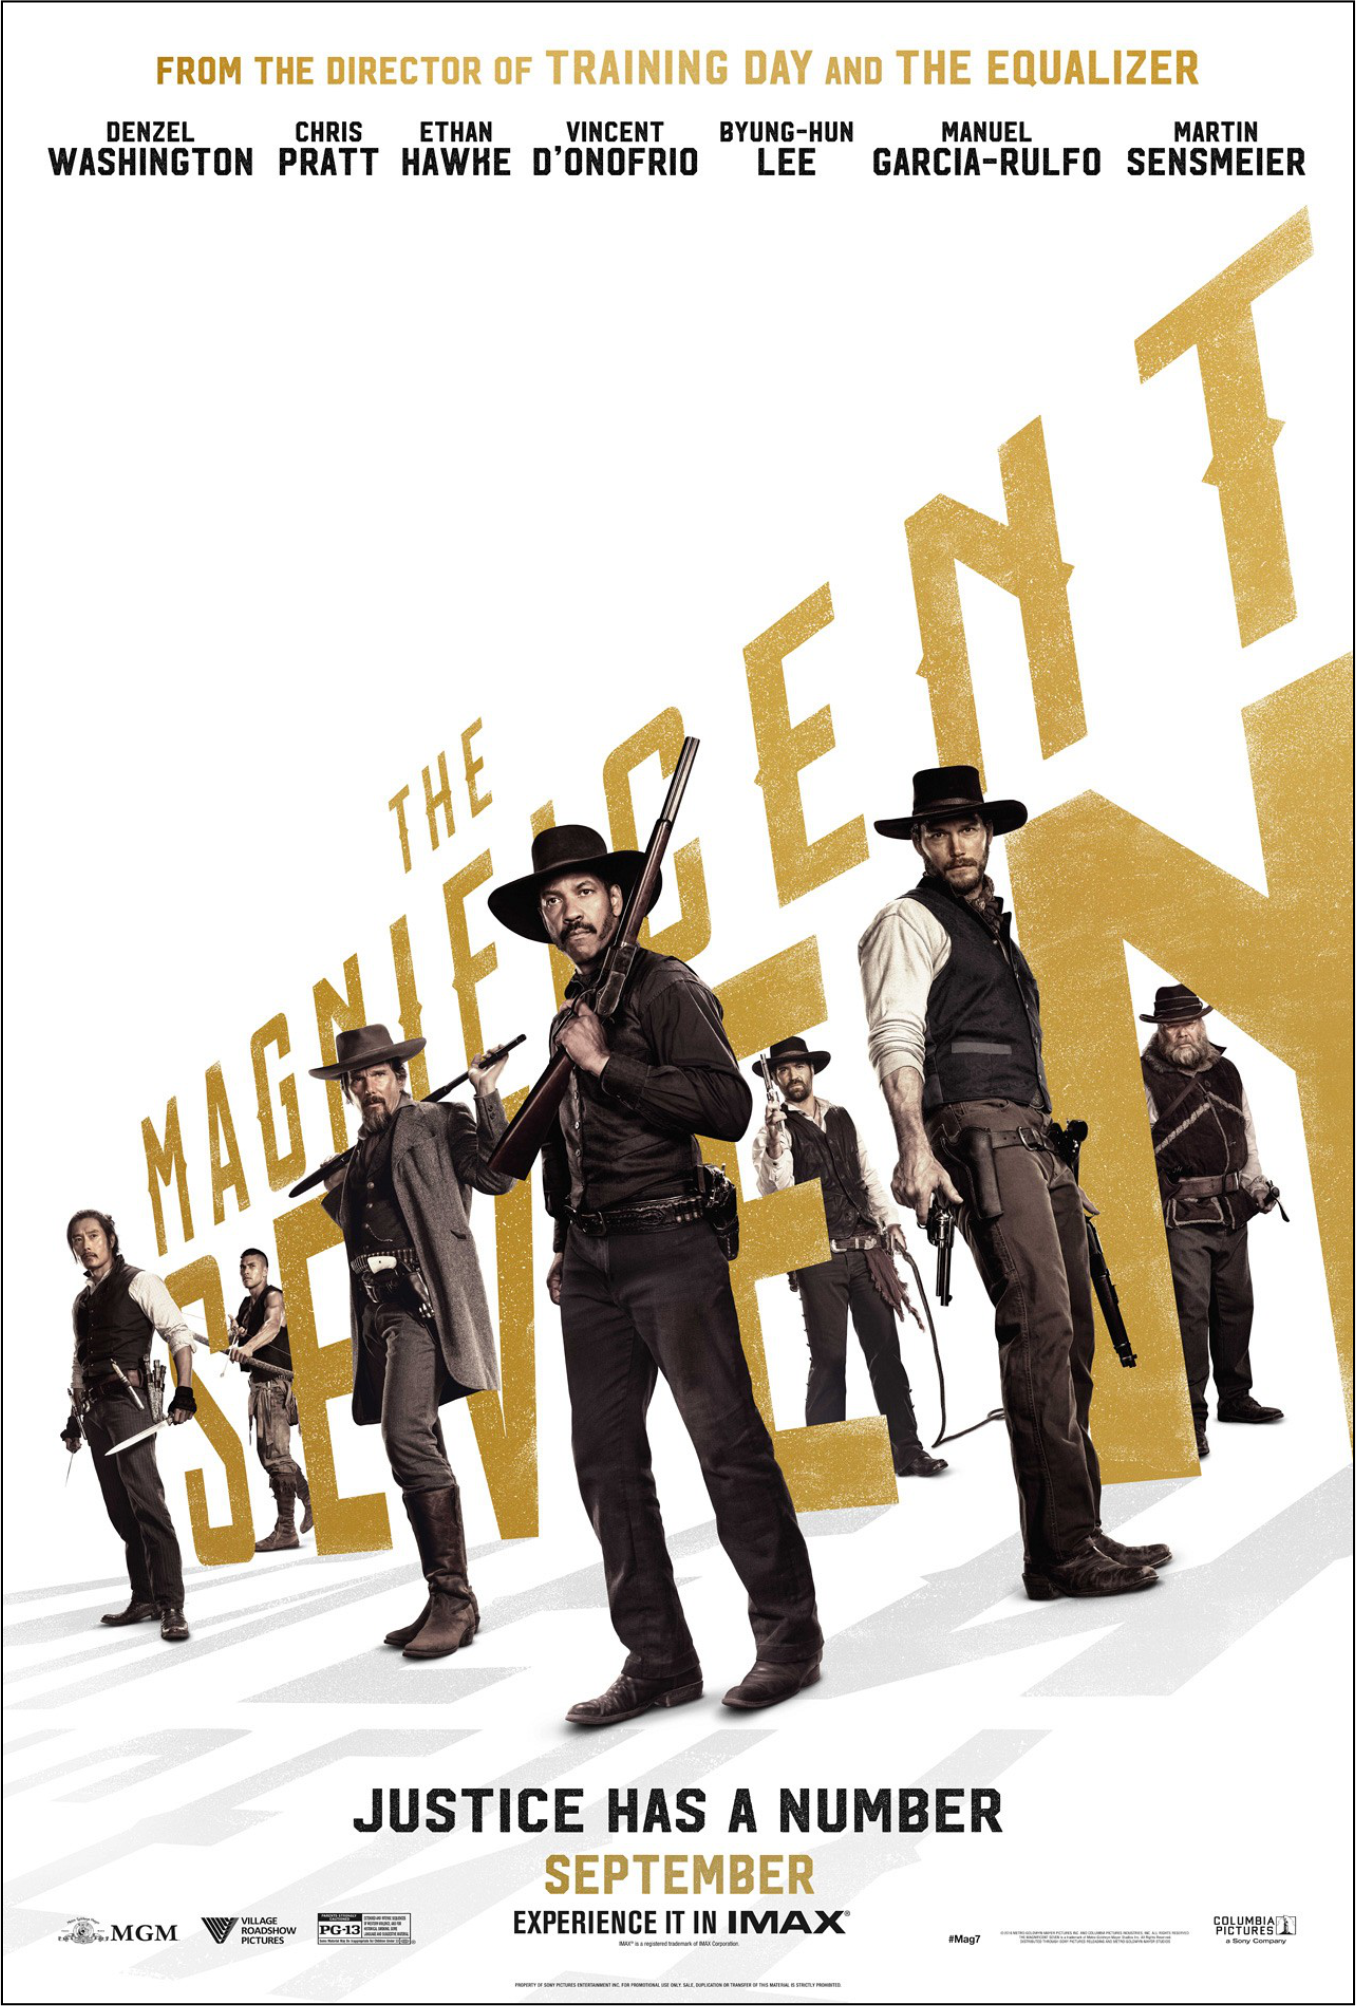 THE MAGNIFICENT 7 2016 - poster 4